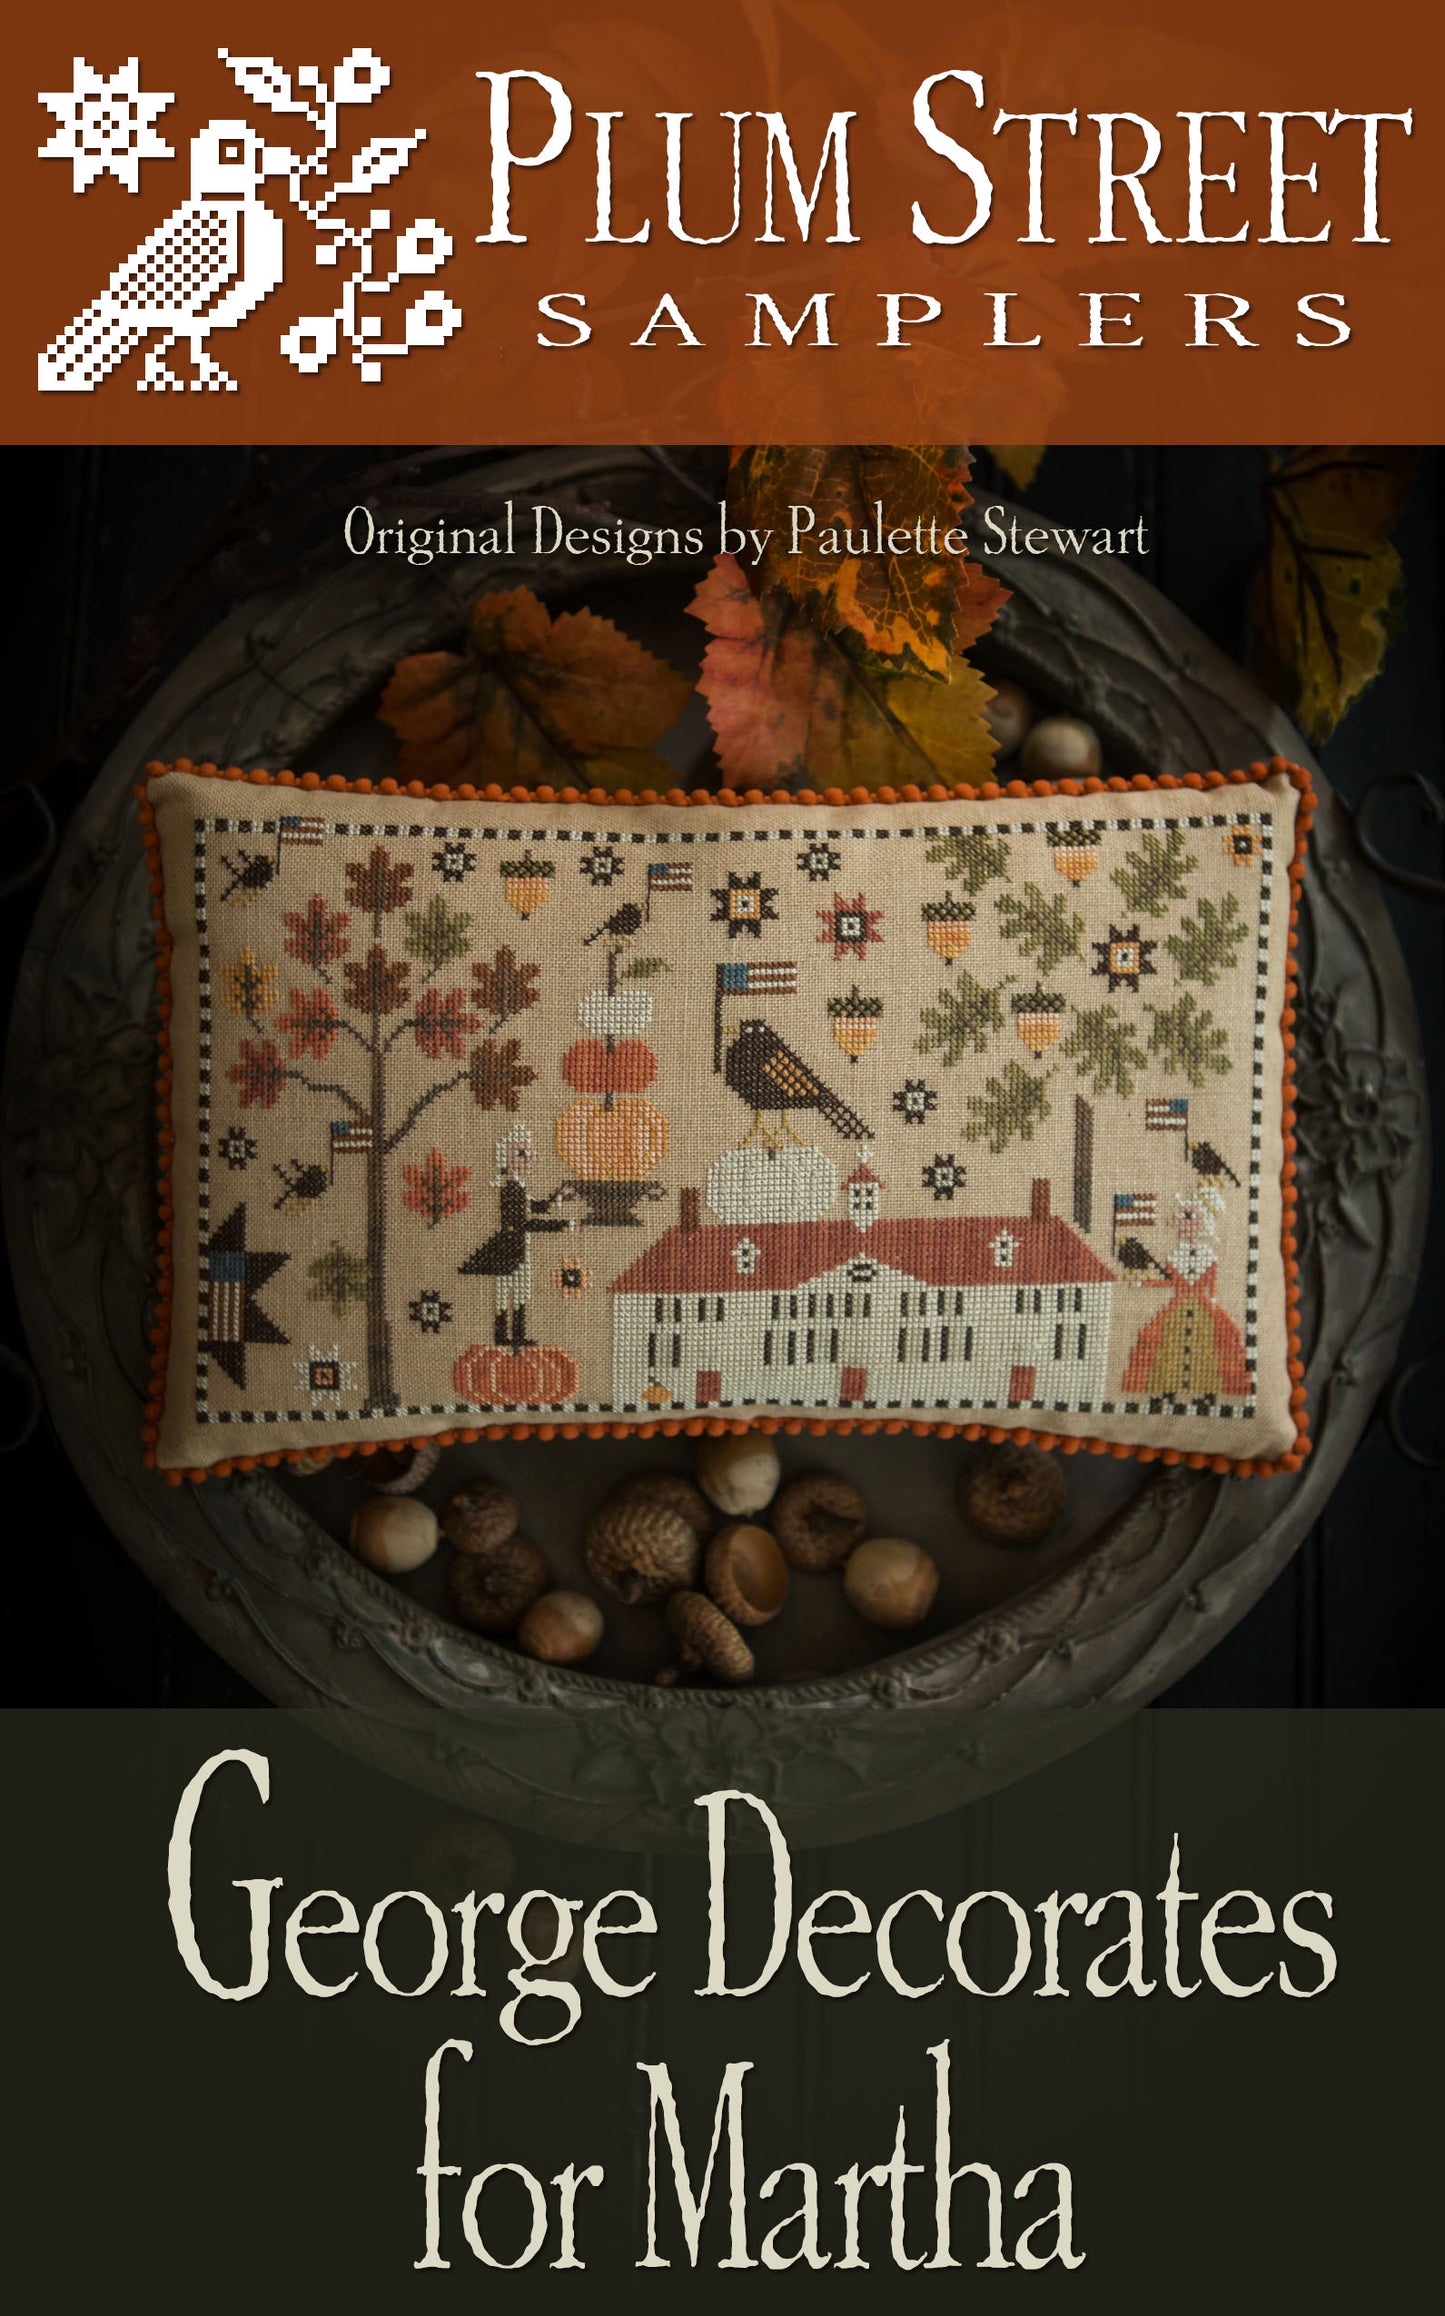 George Decorates For Martha by Plum Street Samplers